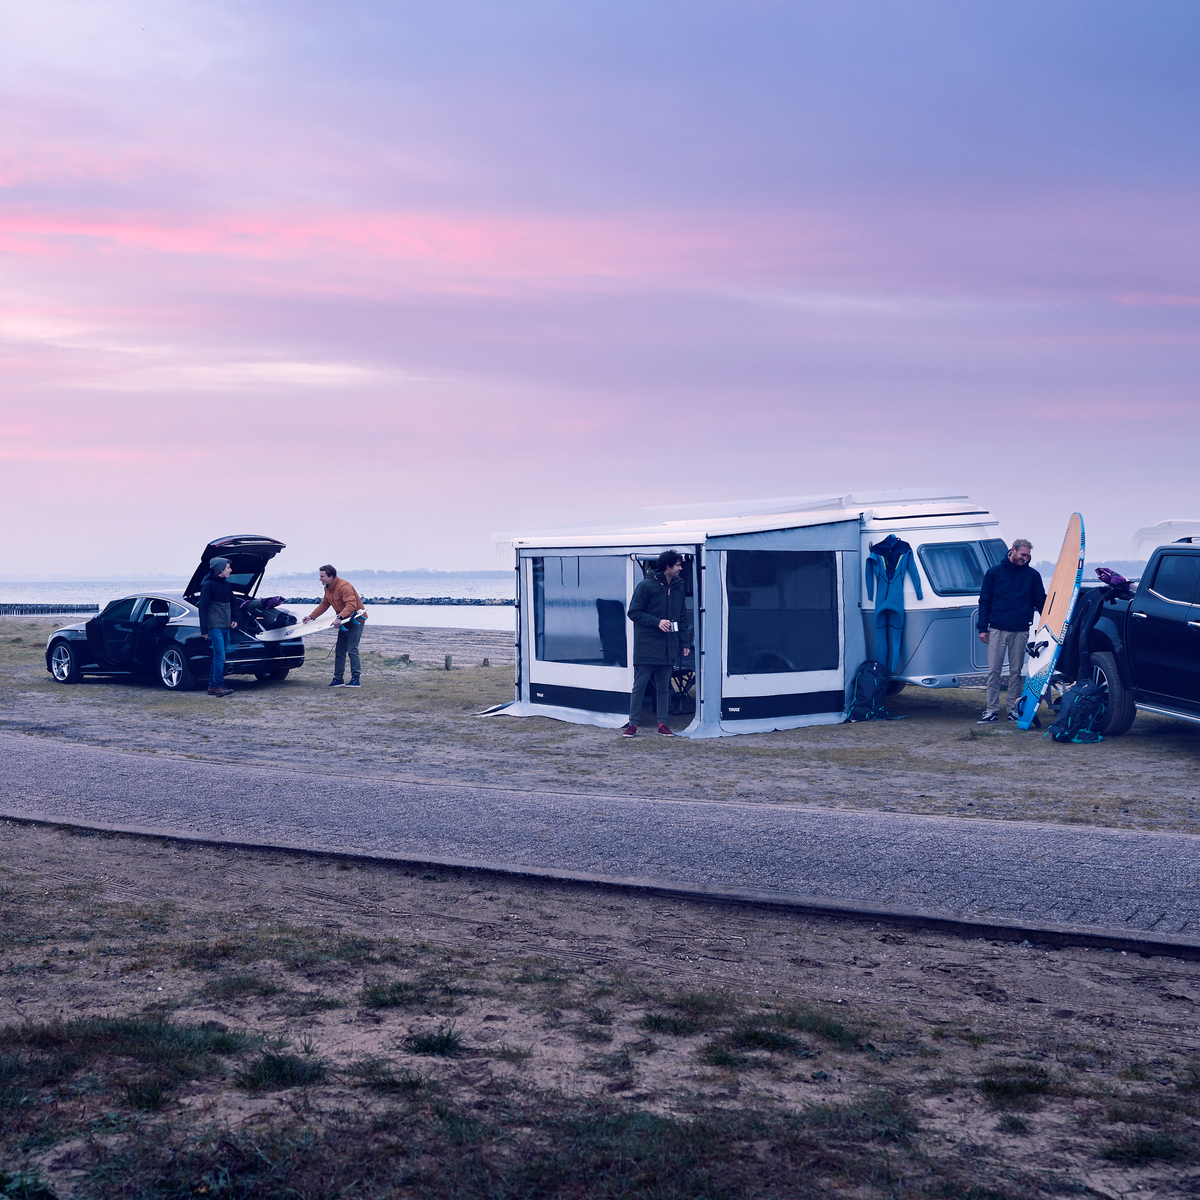 Vehicles parked by a street at the sunset with a Thule Residence G3 Eriba motorhome awning tent.